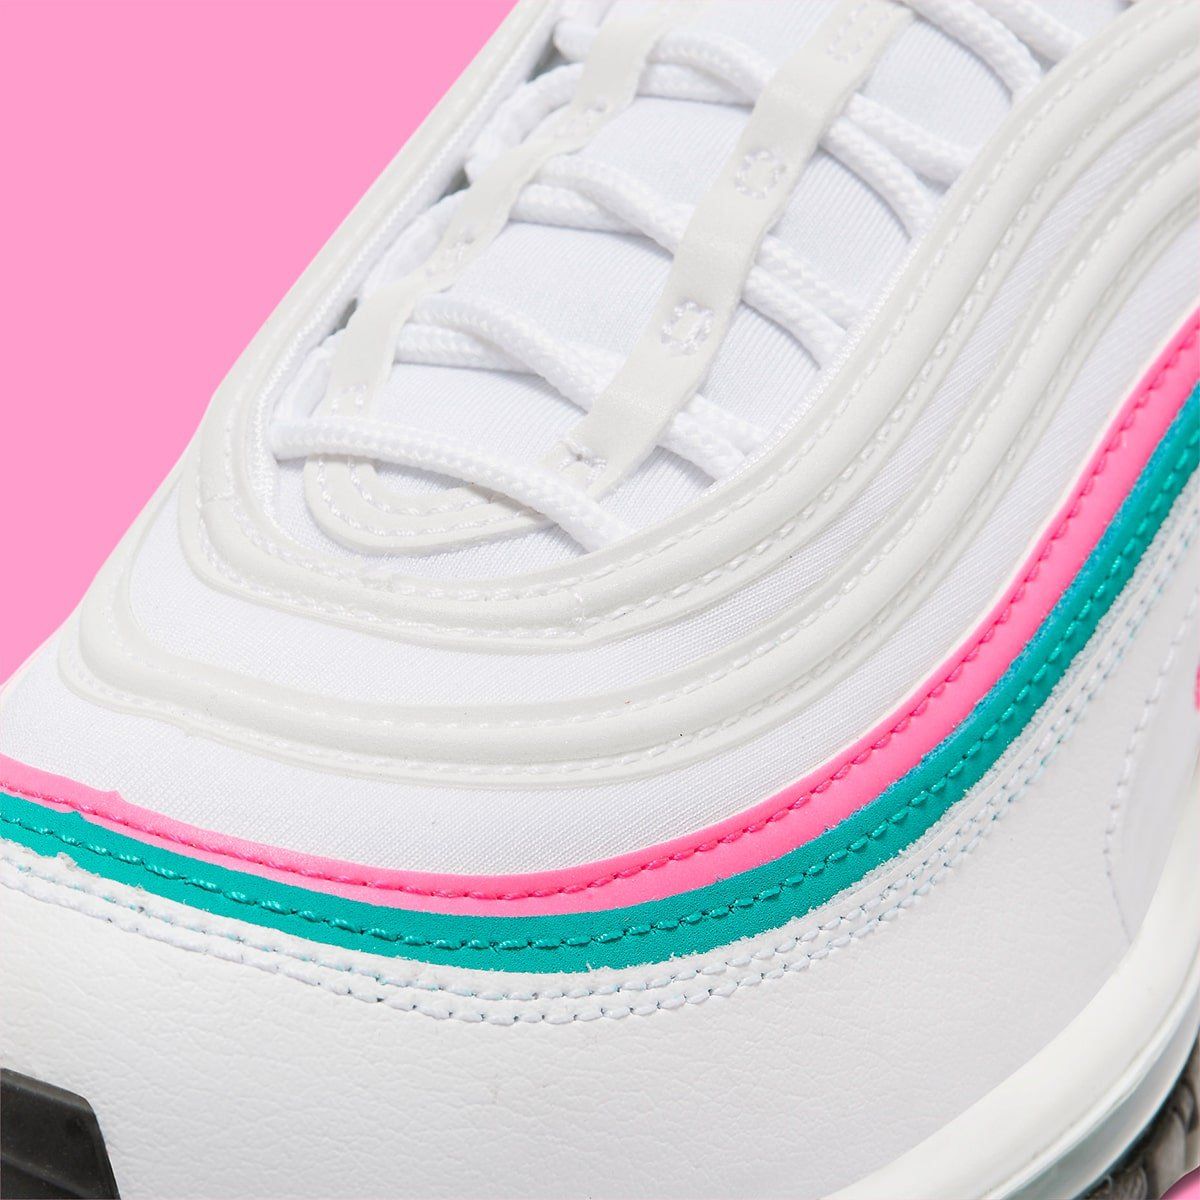 Nike Max 97 "South Beach" Surfaces for Summer | OF HEAT